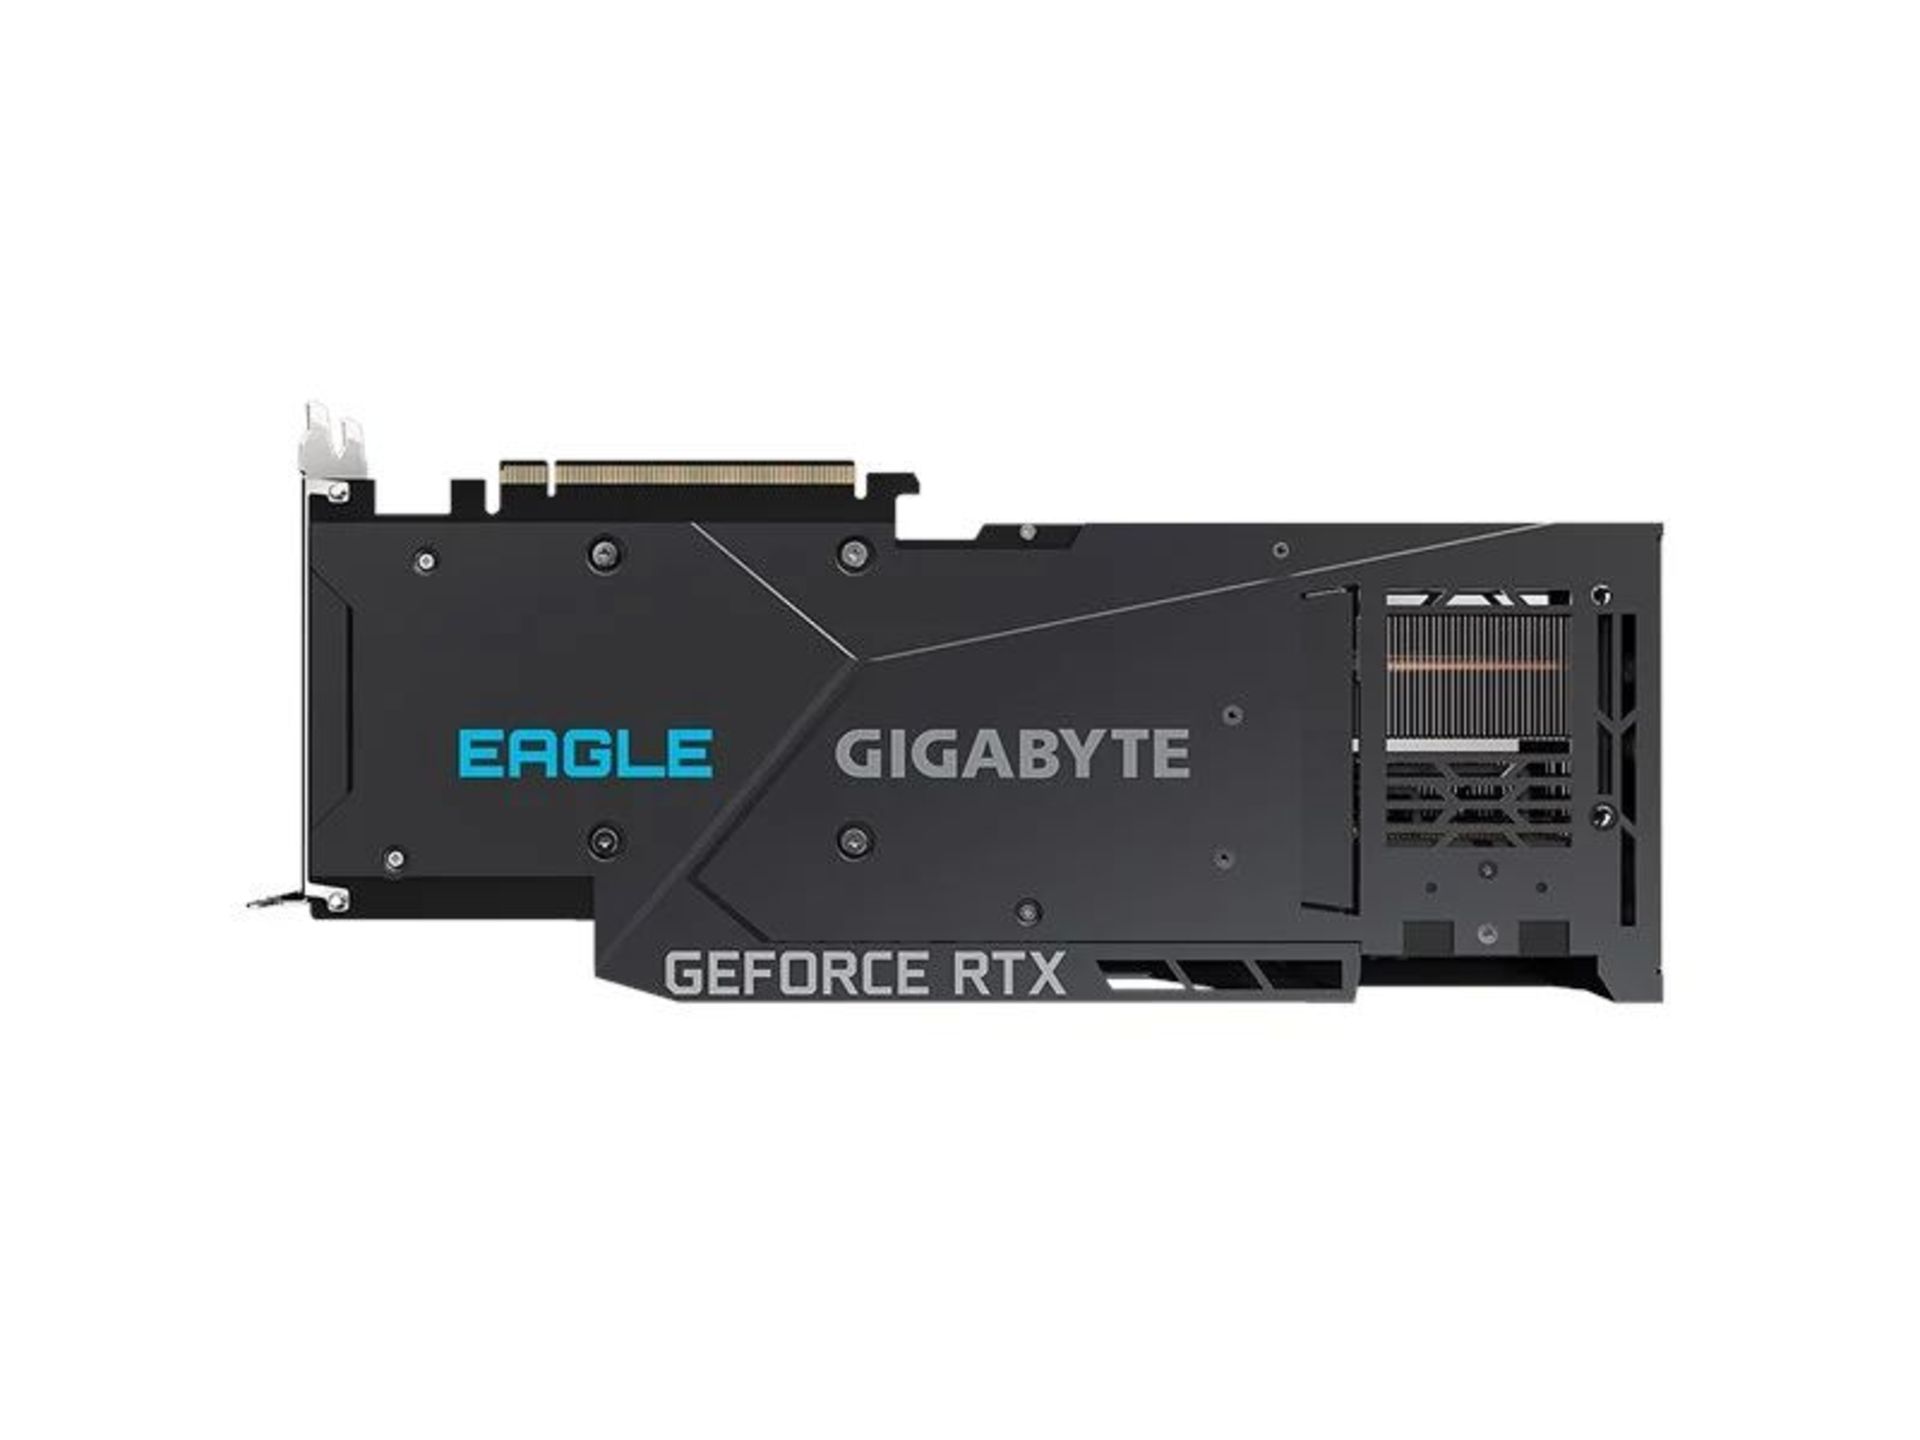 Gigabyte GeForce RTX 3080 EAGLE 10GB Graphics Card. - P2. RRP £1,250.00. WINDFORCE 3X cooling system - Image 2 of 2